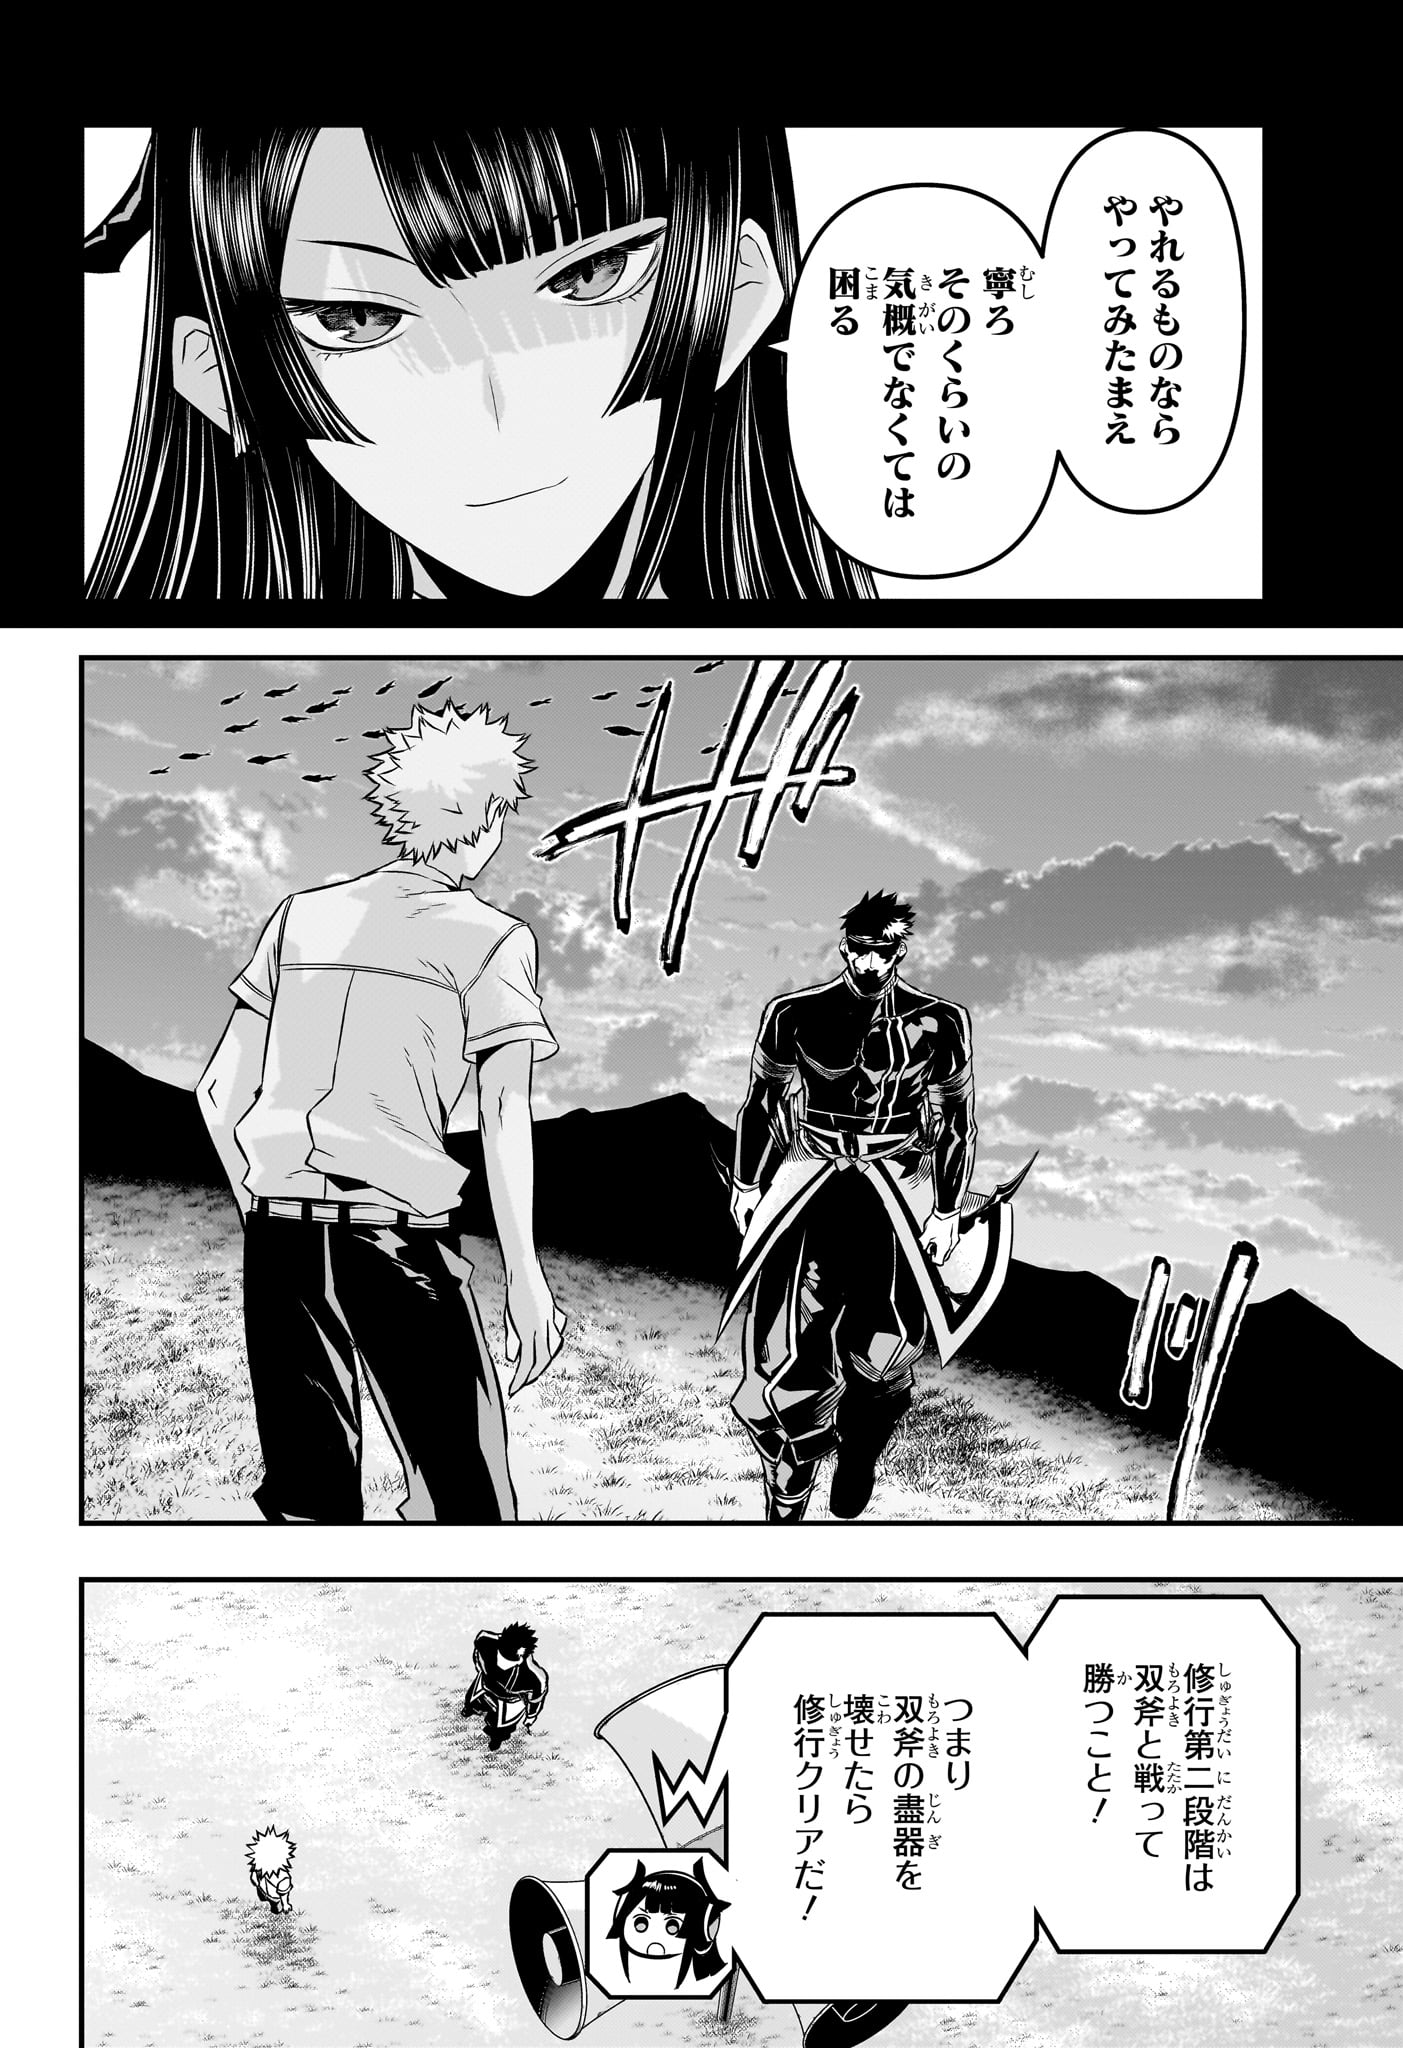 Nue no Onmyouji - Chapter 48 - Page 2